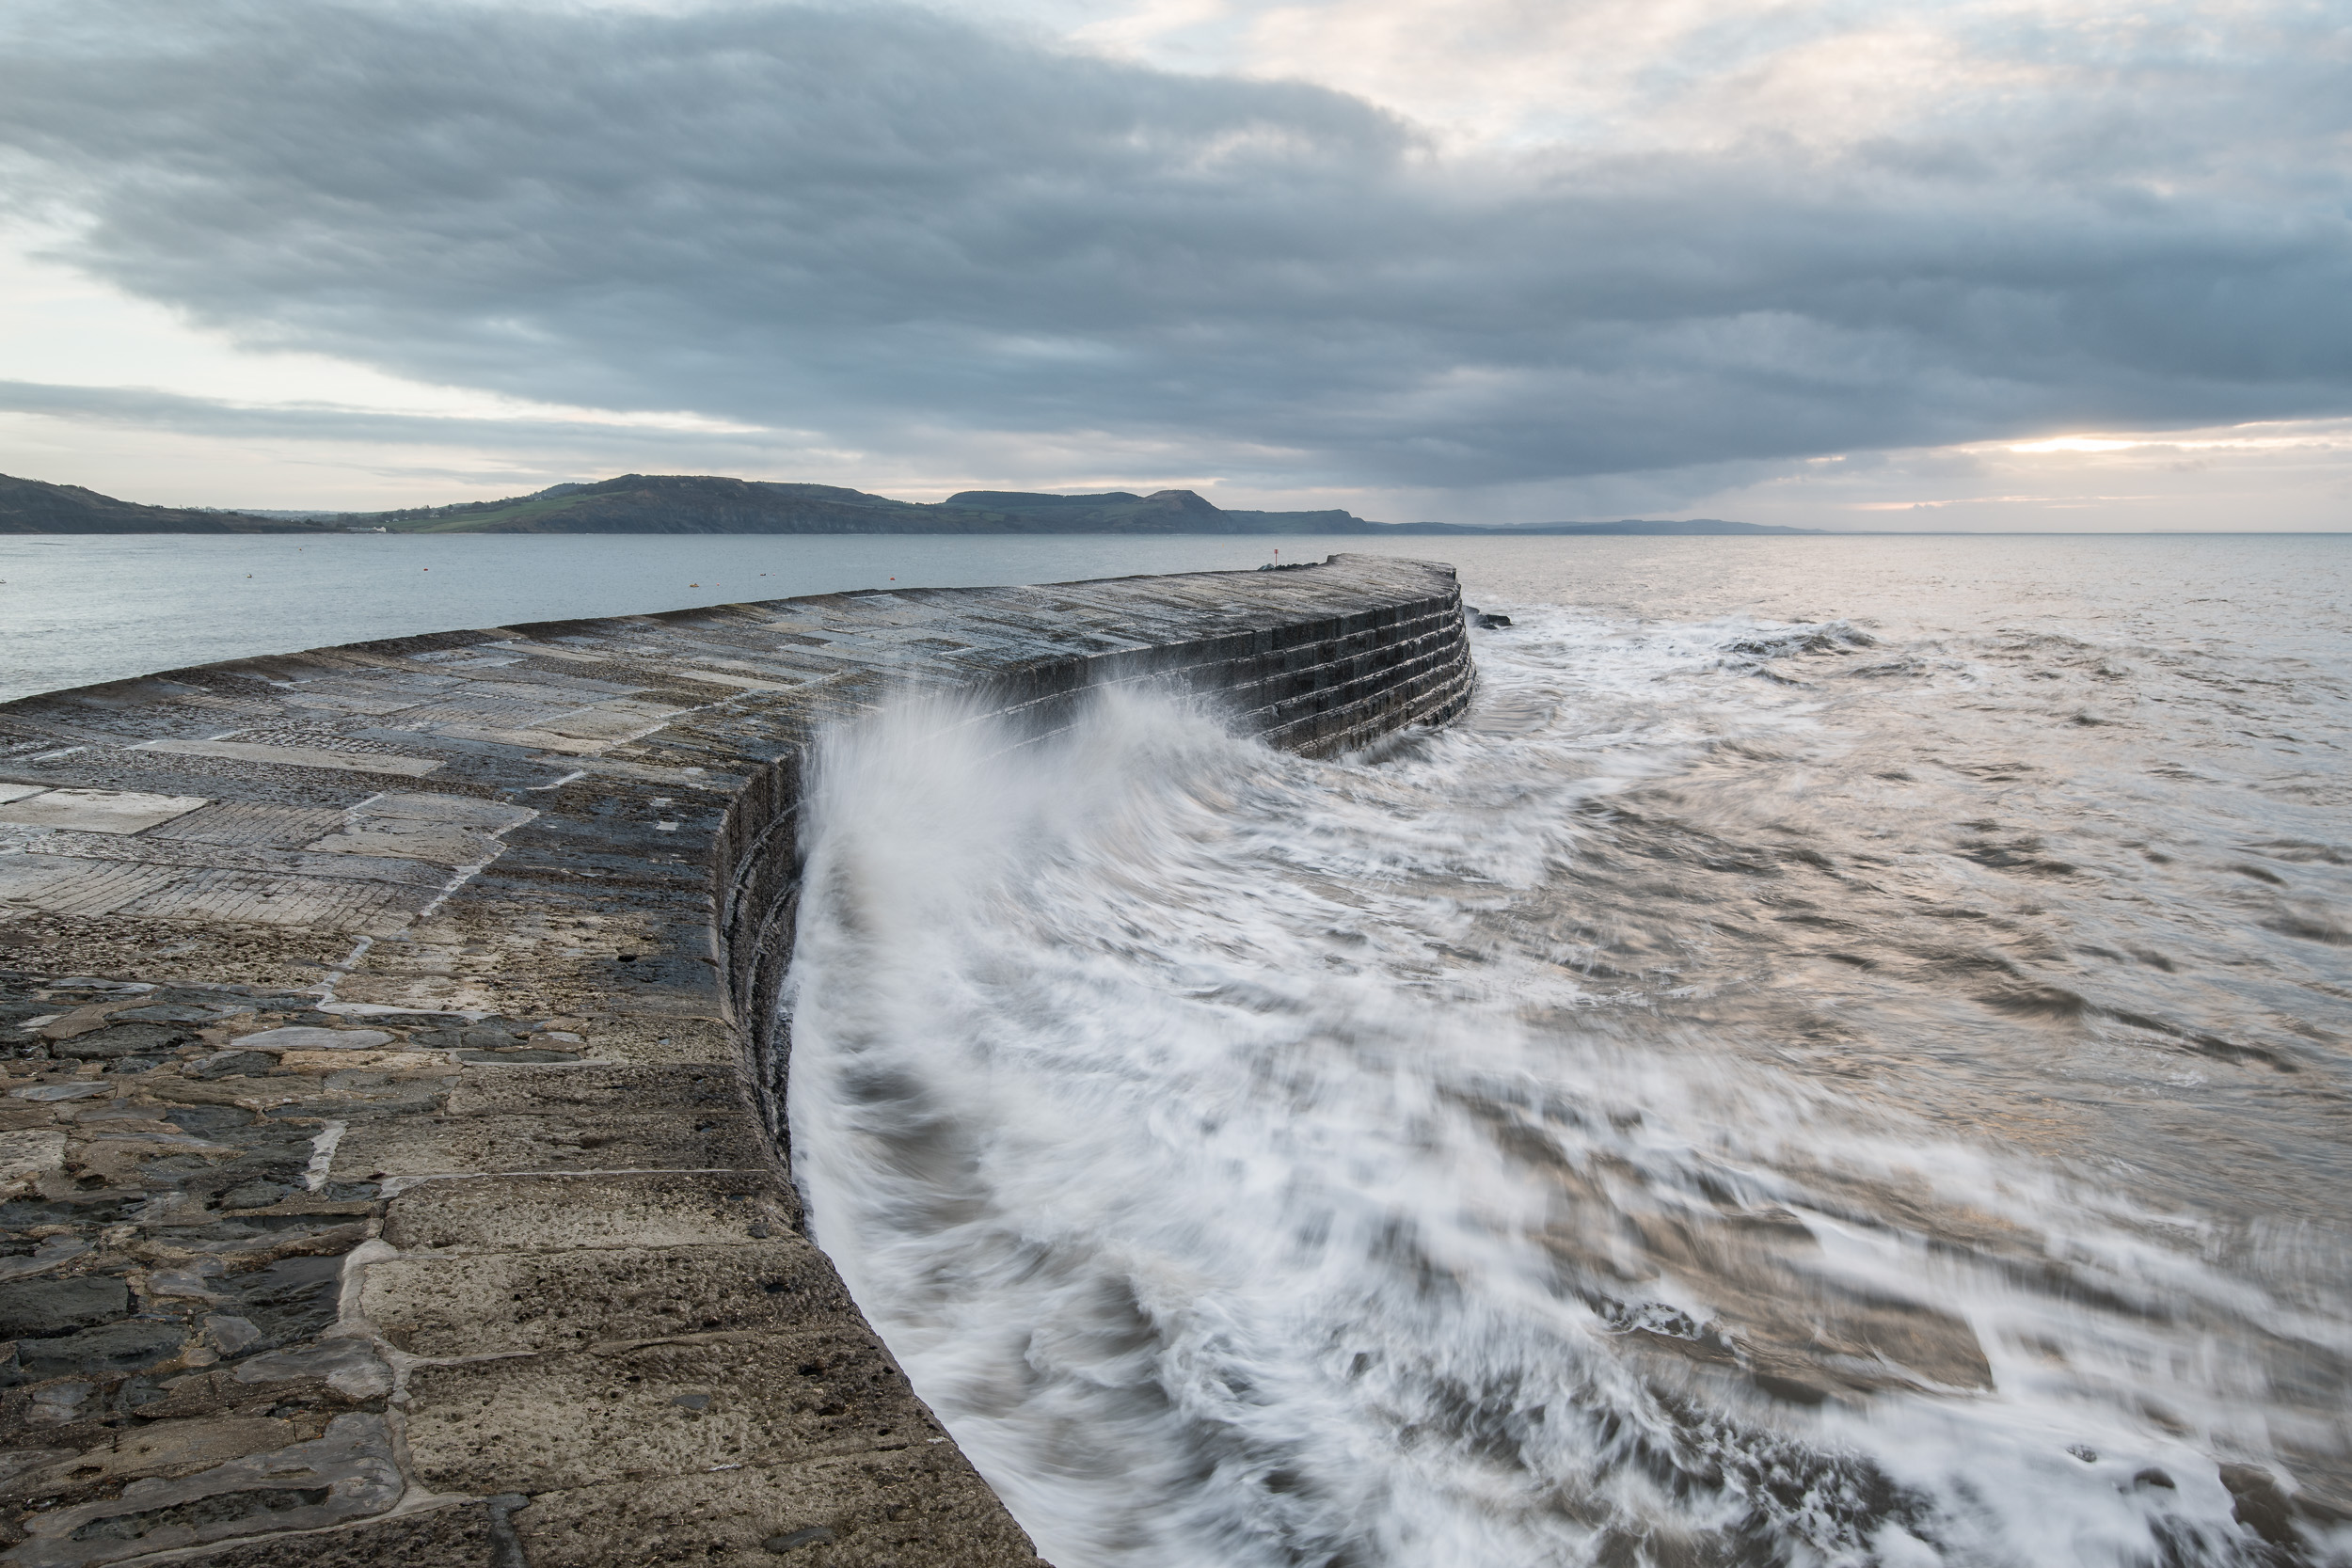 The Harbour Wall at Lyme Regis